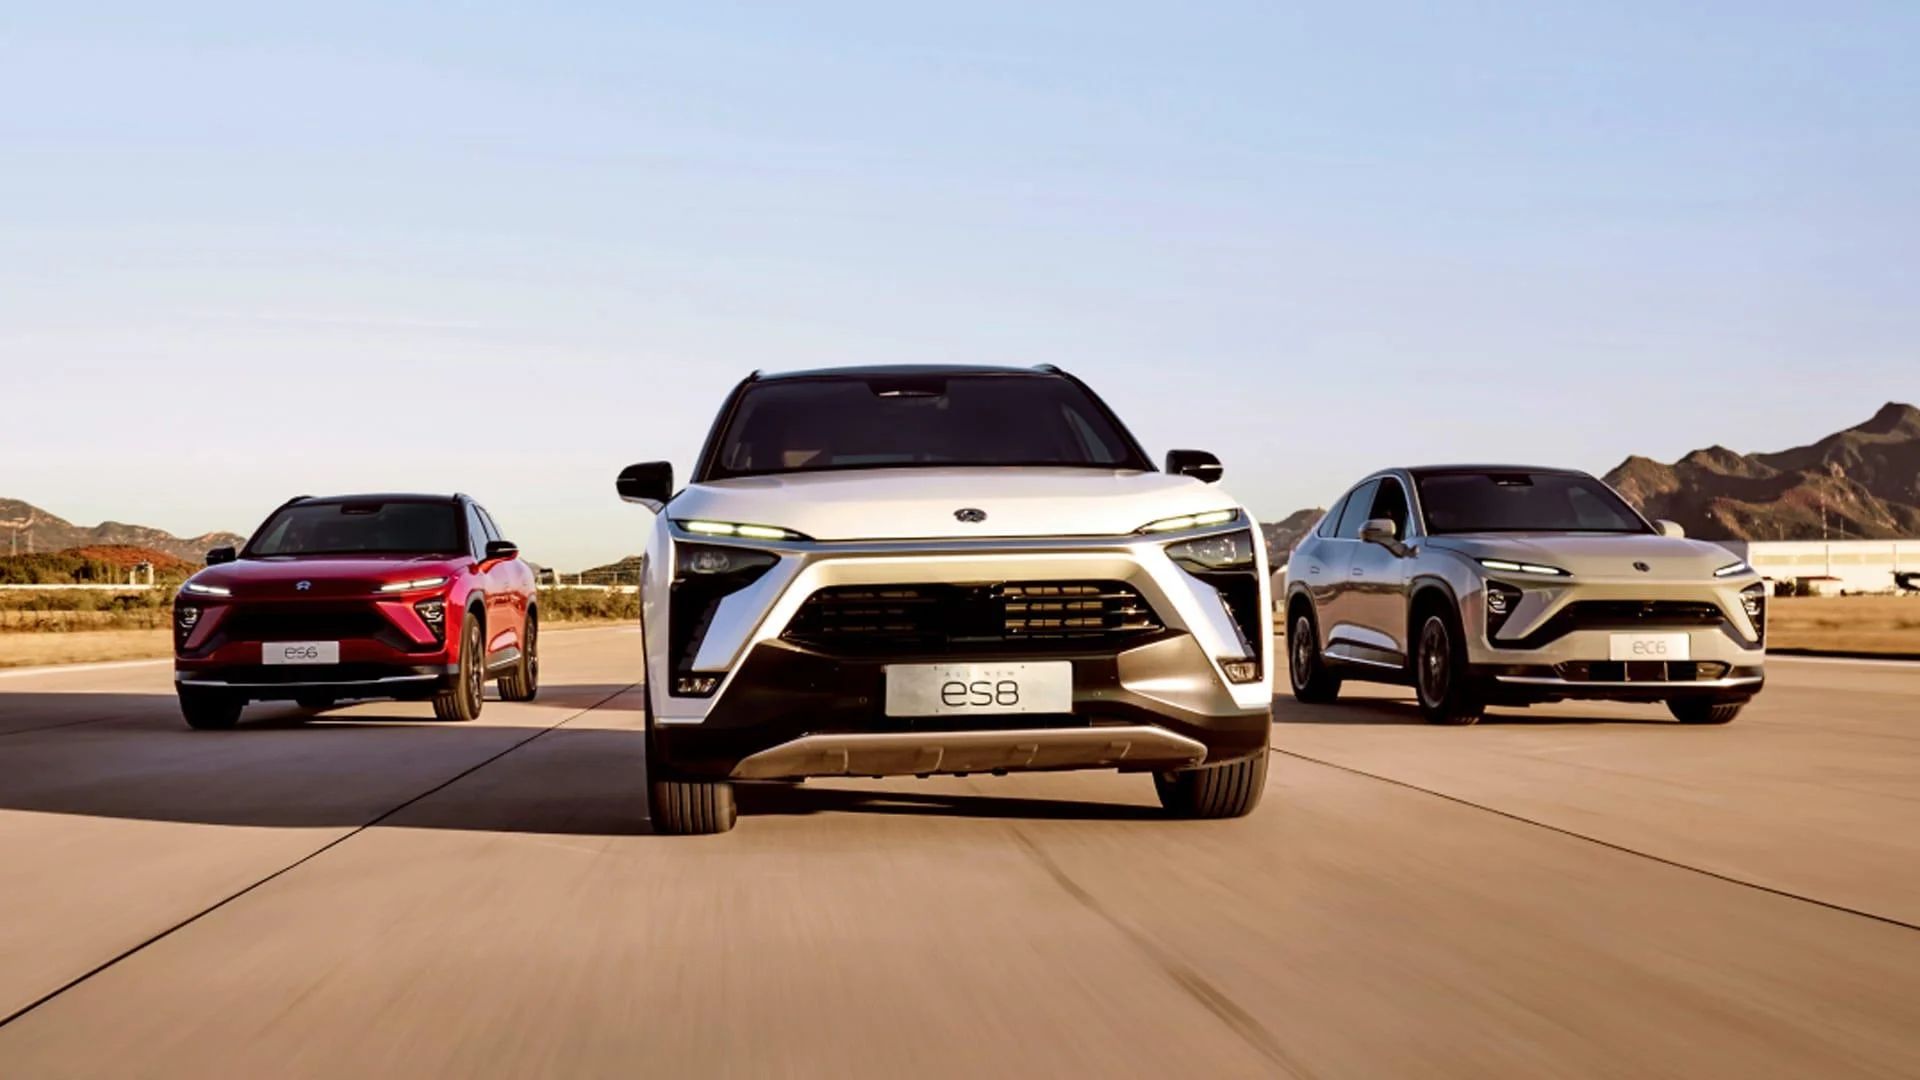 NIO's plans to ramp up production could be slowed if the company's ability to raise money in the U.S. is restricted. Image source: NIO, Inc.